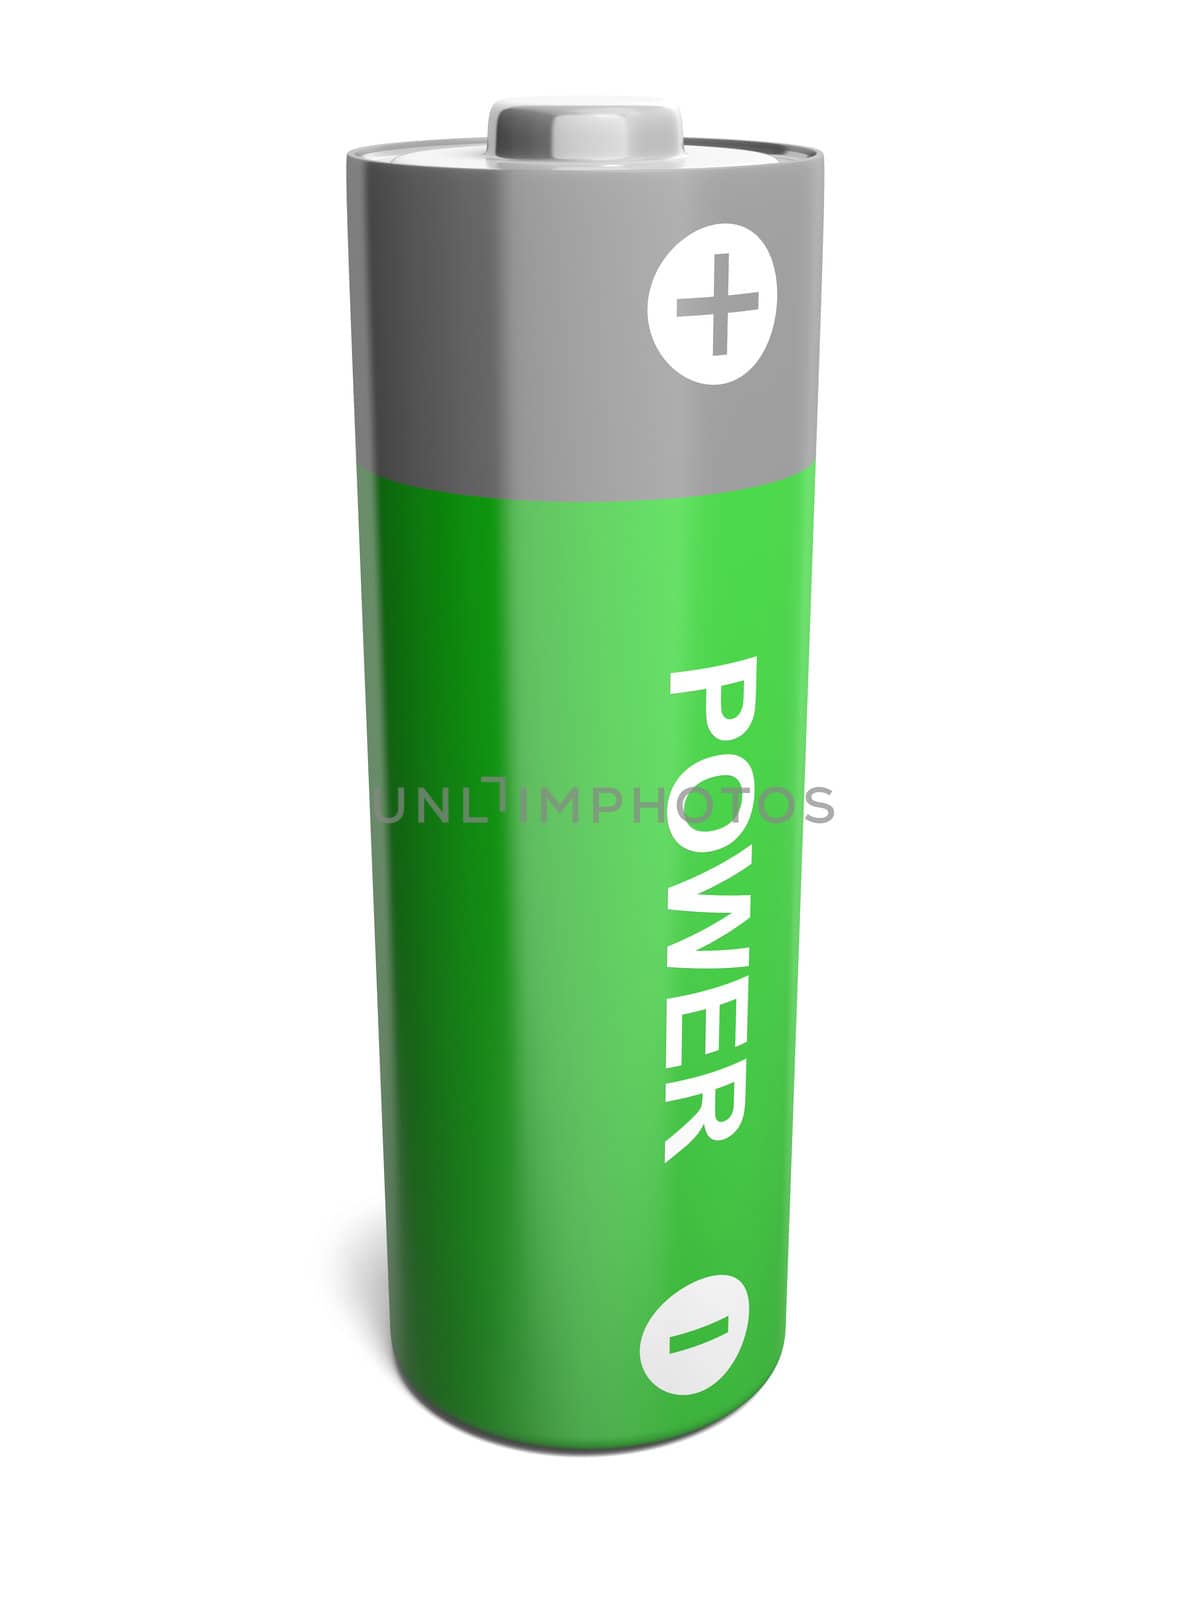 3D green battery illustration isolated on white background